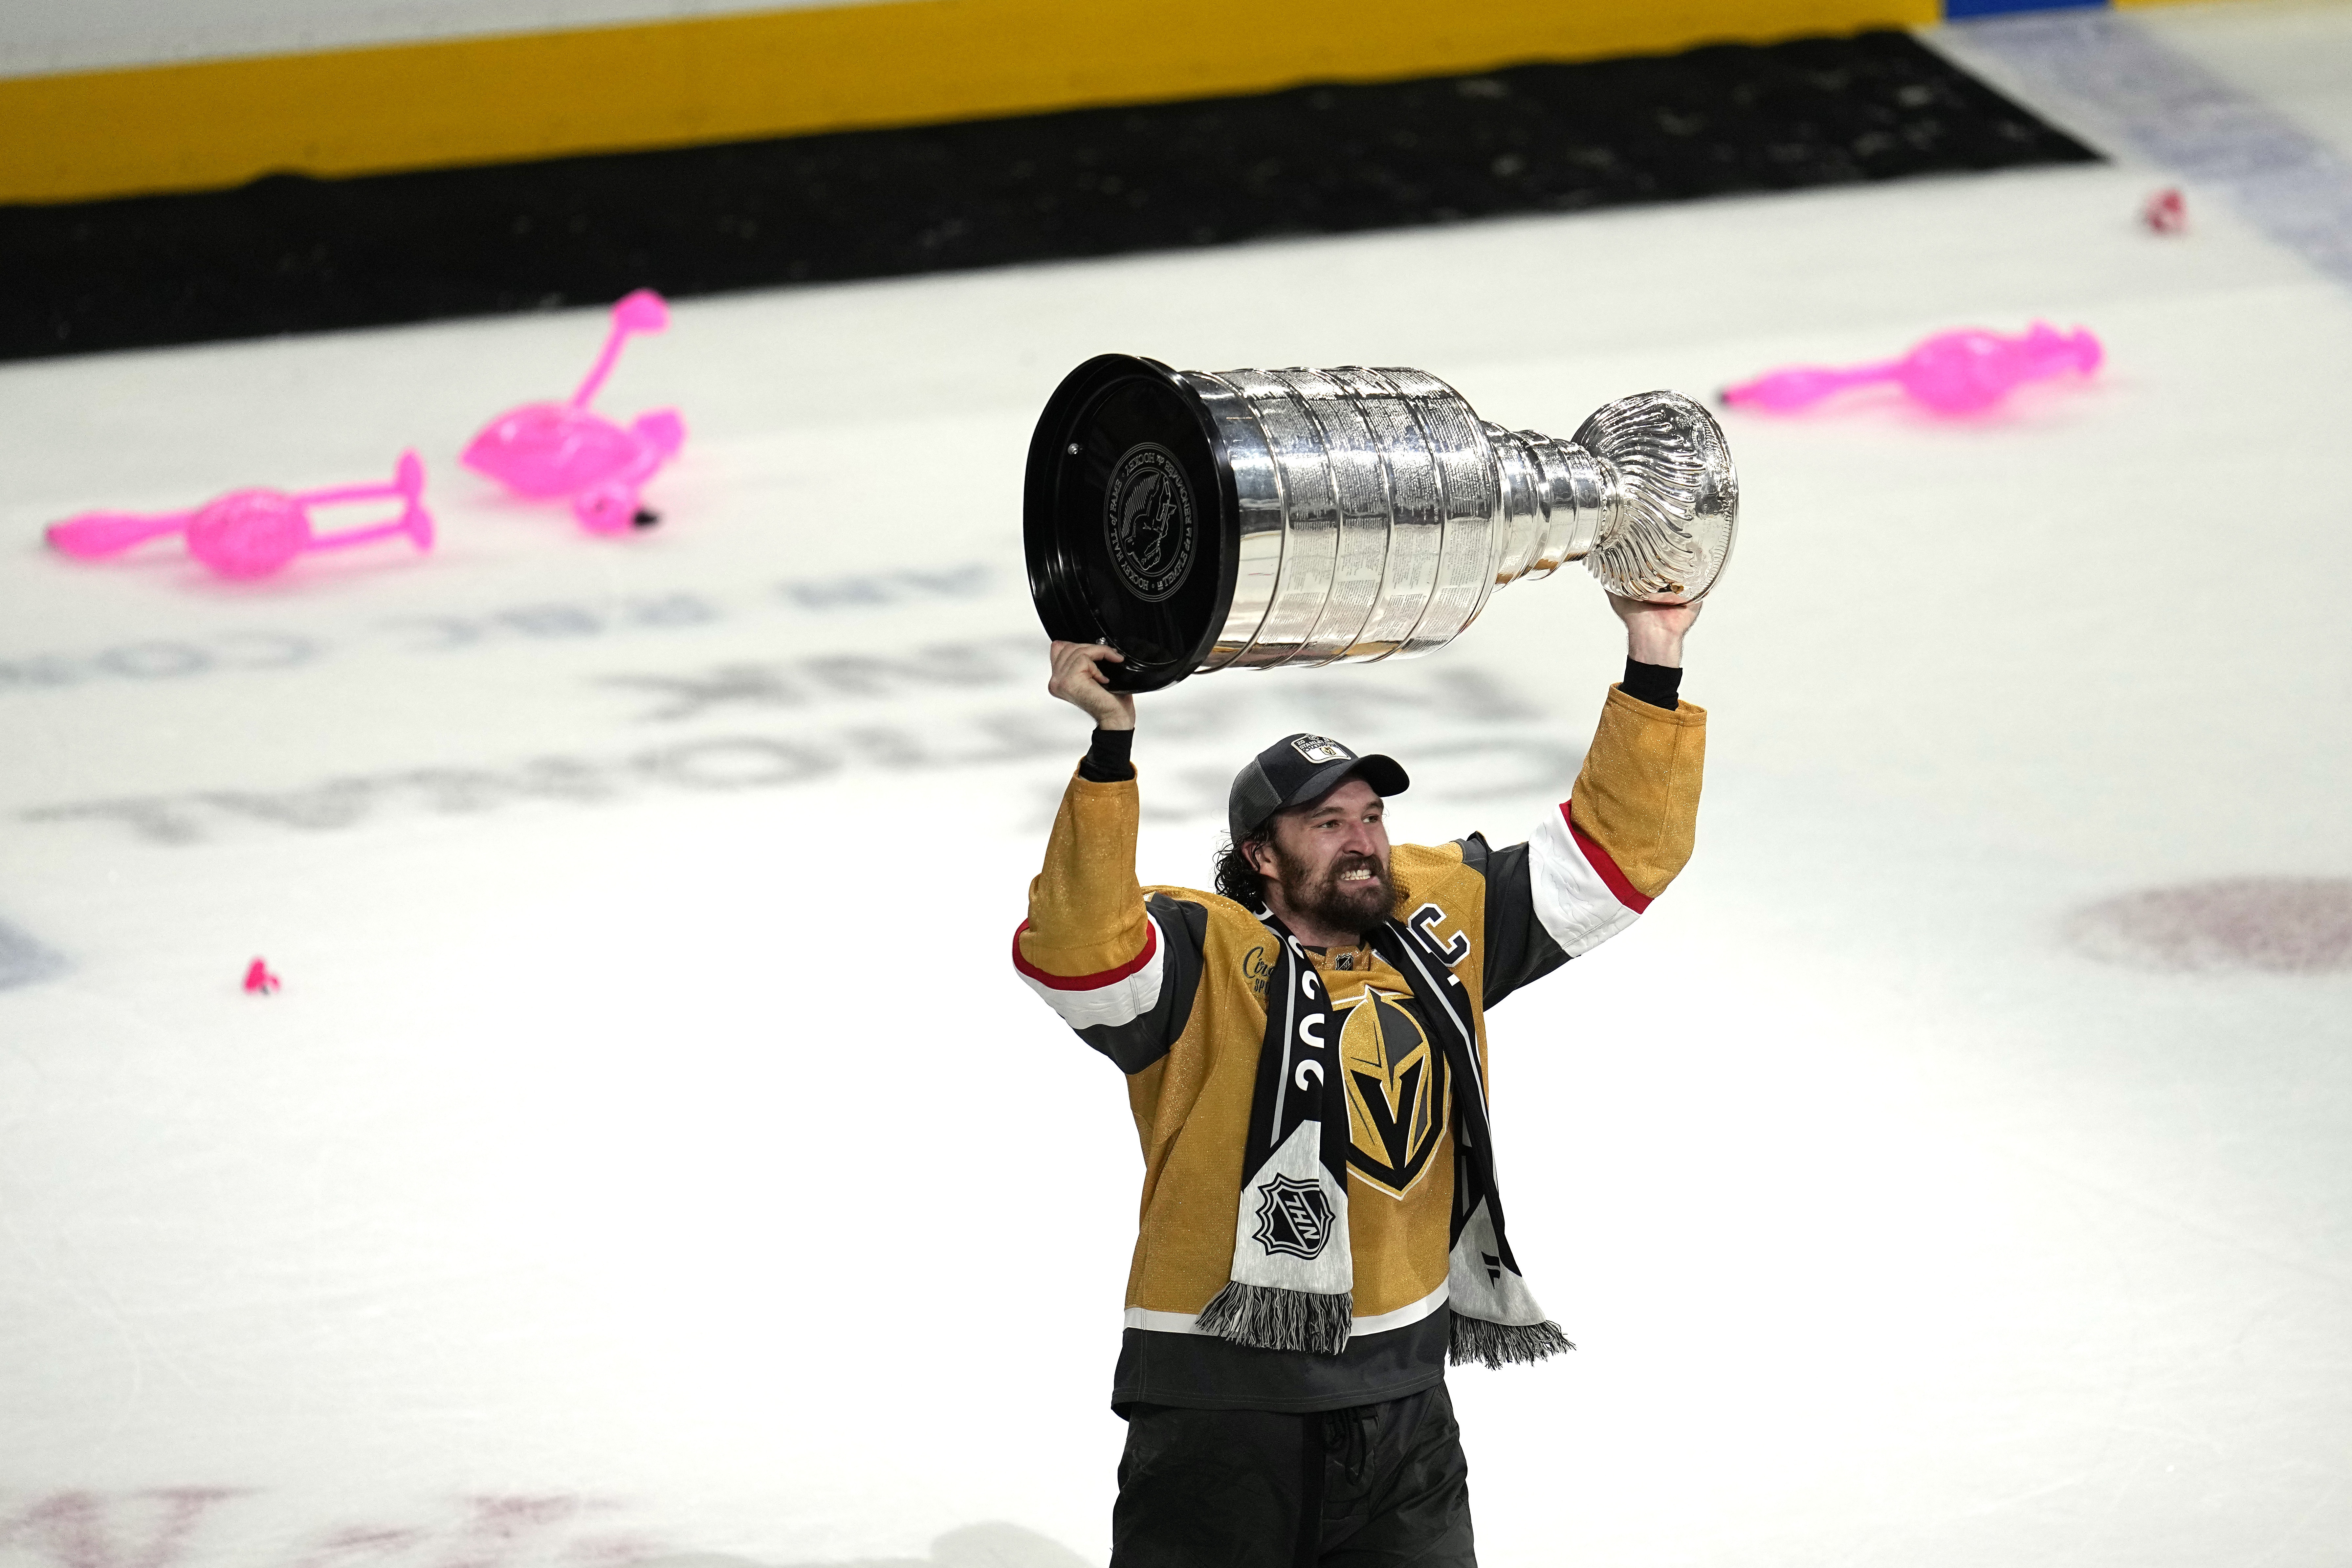 Quest For The Cup Vegas Golden Knights 2023 Stanley Cup SVG